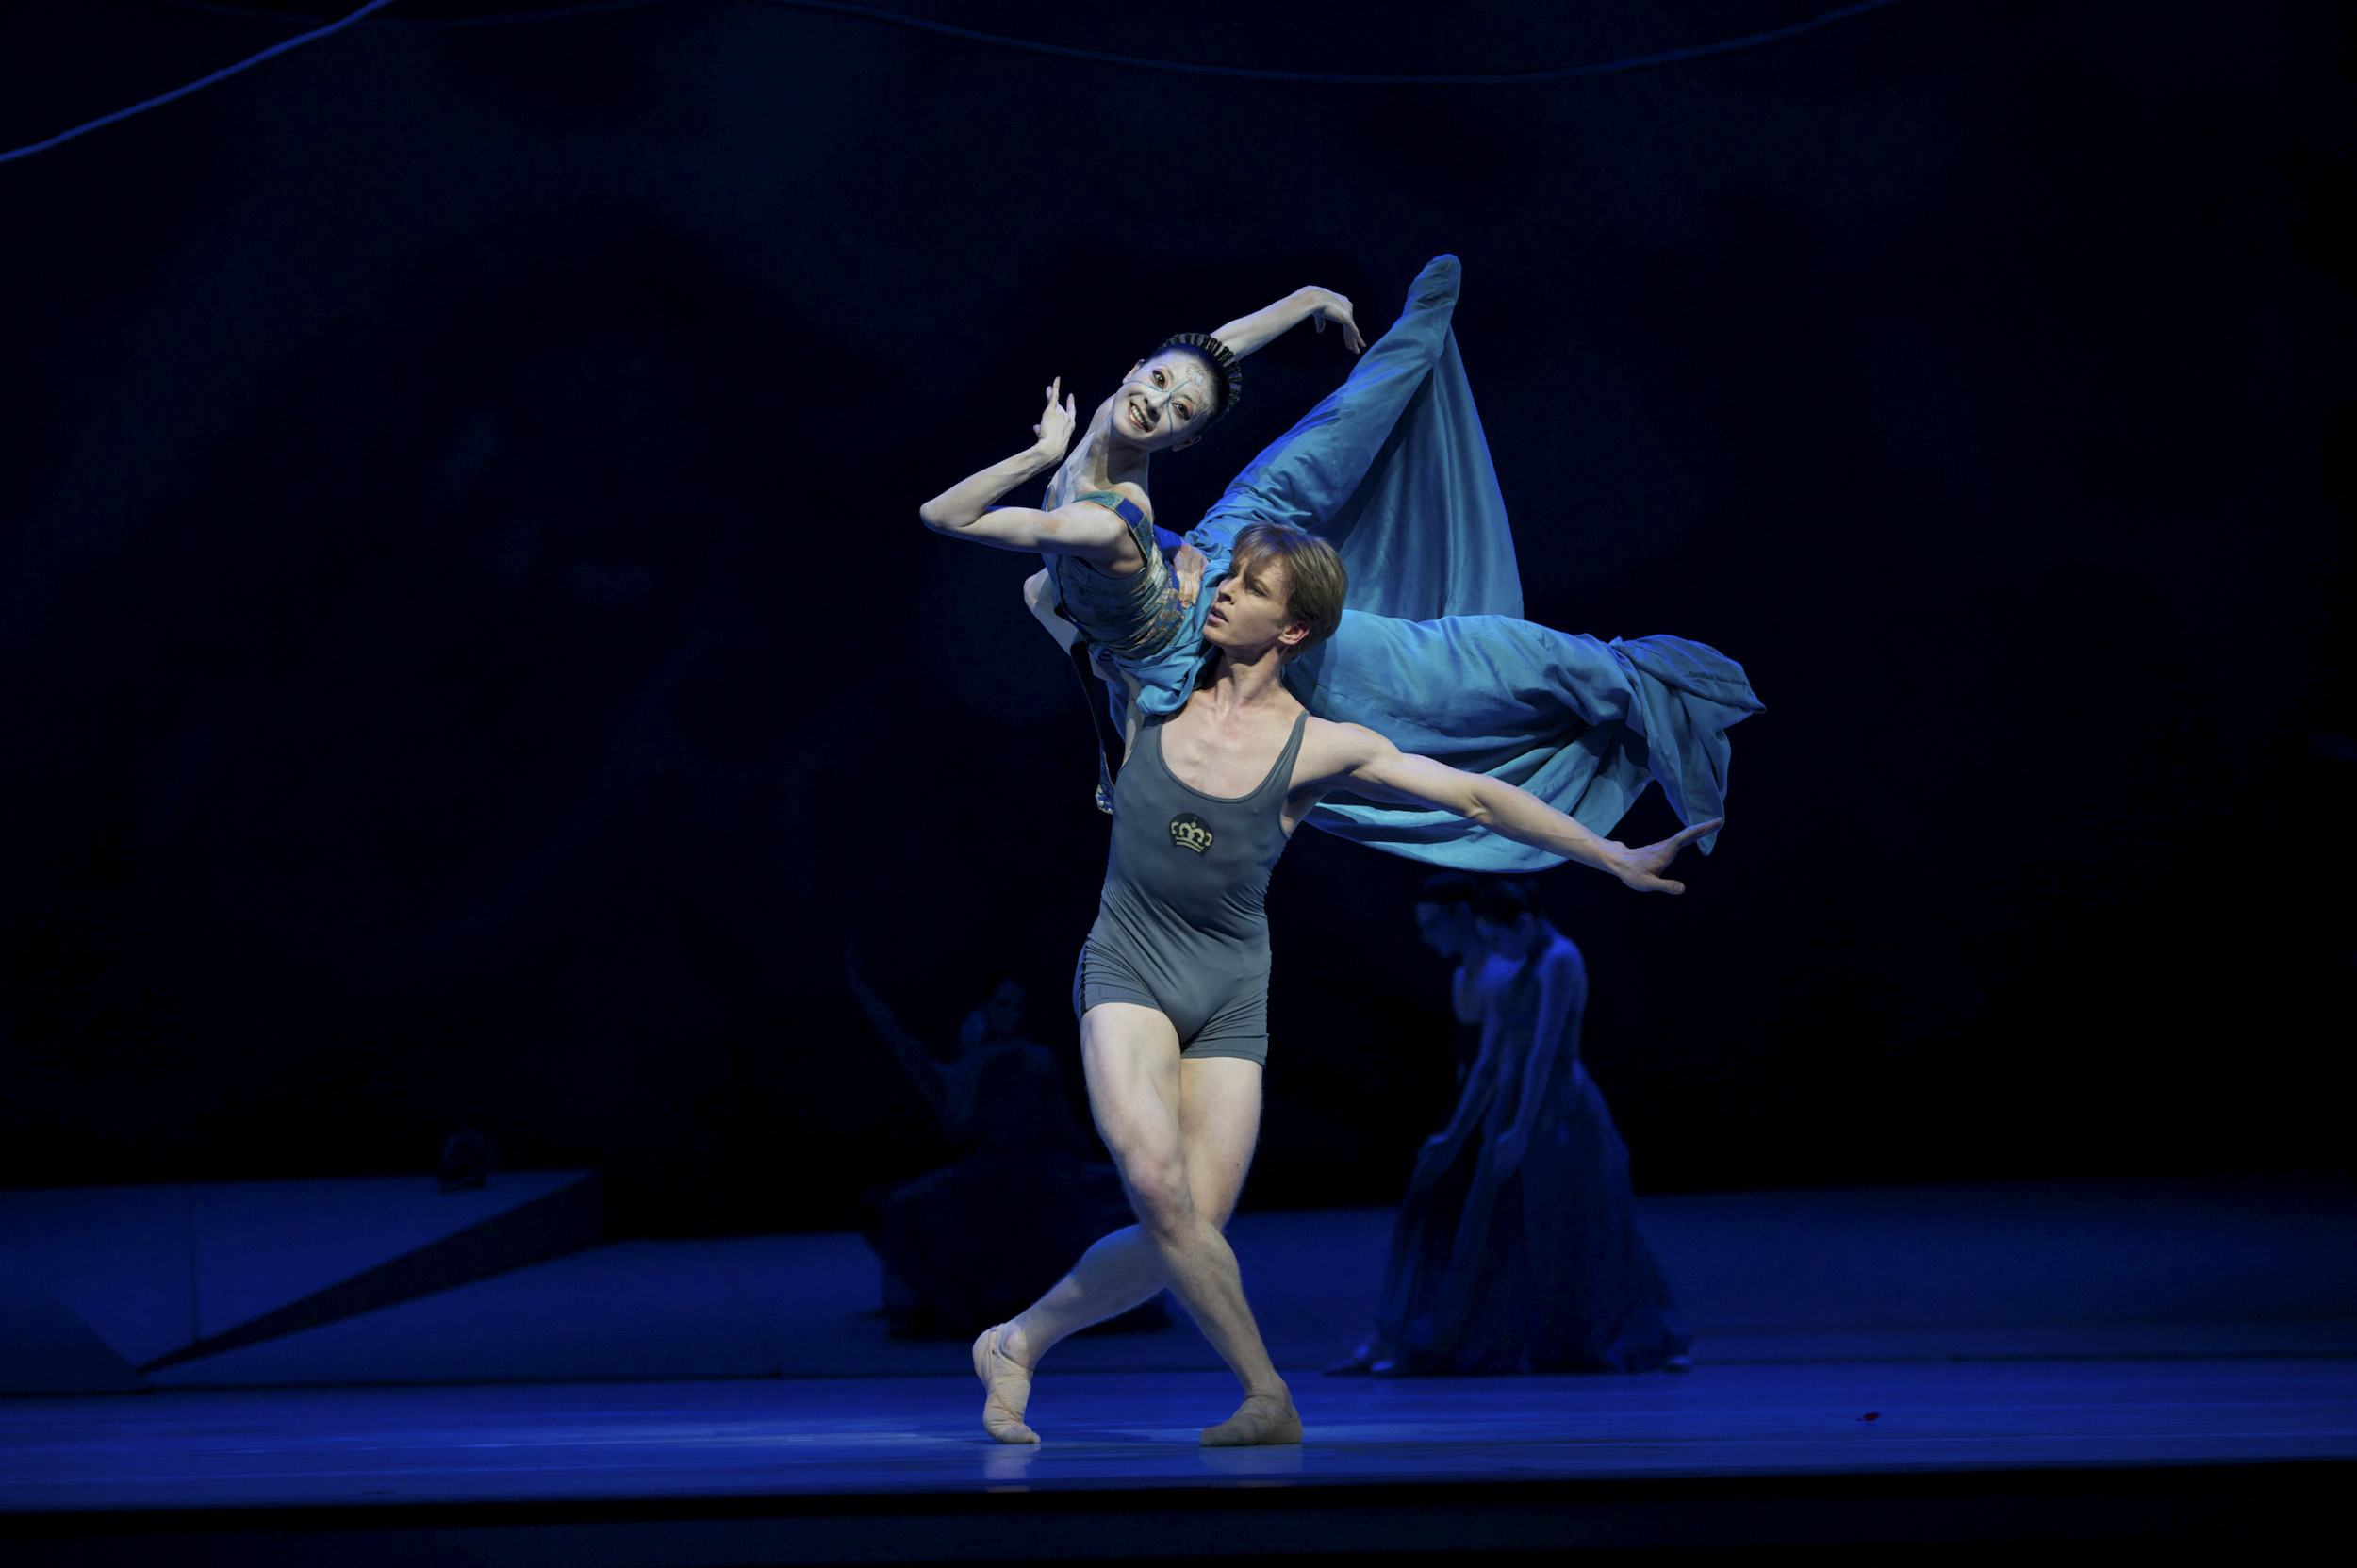 During a performance of The Little Mermaid, Tiit Helimets lifts Yuan Yuan Tan onto his right shoulder. She balances on her hips and extends her legs back, lifting her right leg slightly higher and reaching her right arm back. She bends her left elbow and tucks her left hand under her chin as she looks out into the audience. Helimets wears a turquoise biketard with tank straps. Tan wears a turquoise bodice and long turquoise skirt that wraps around her feet.